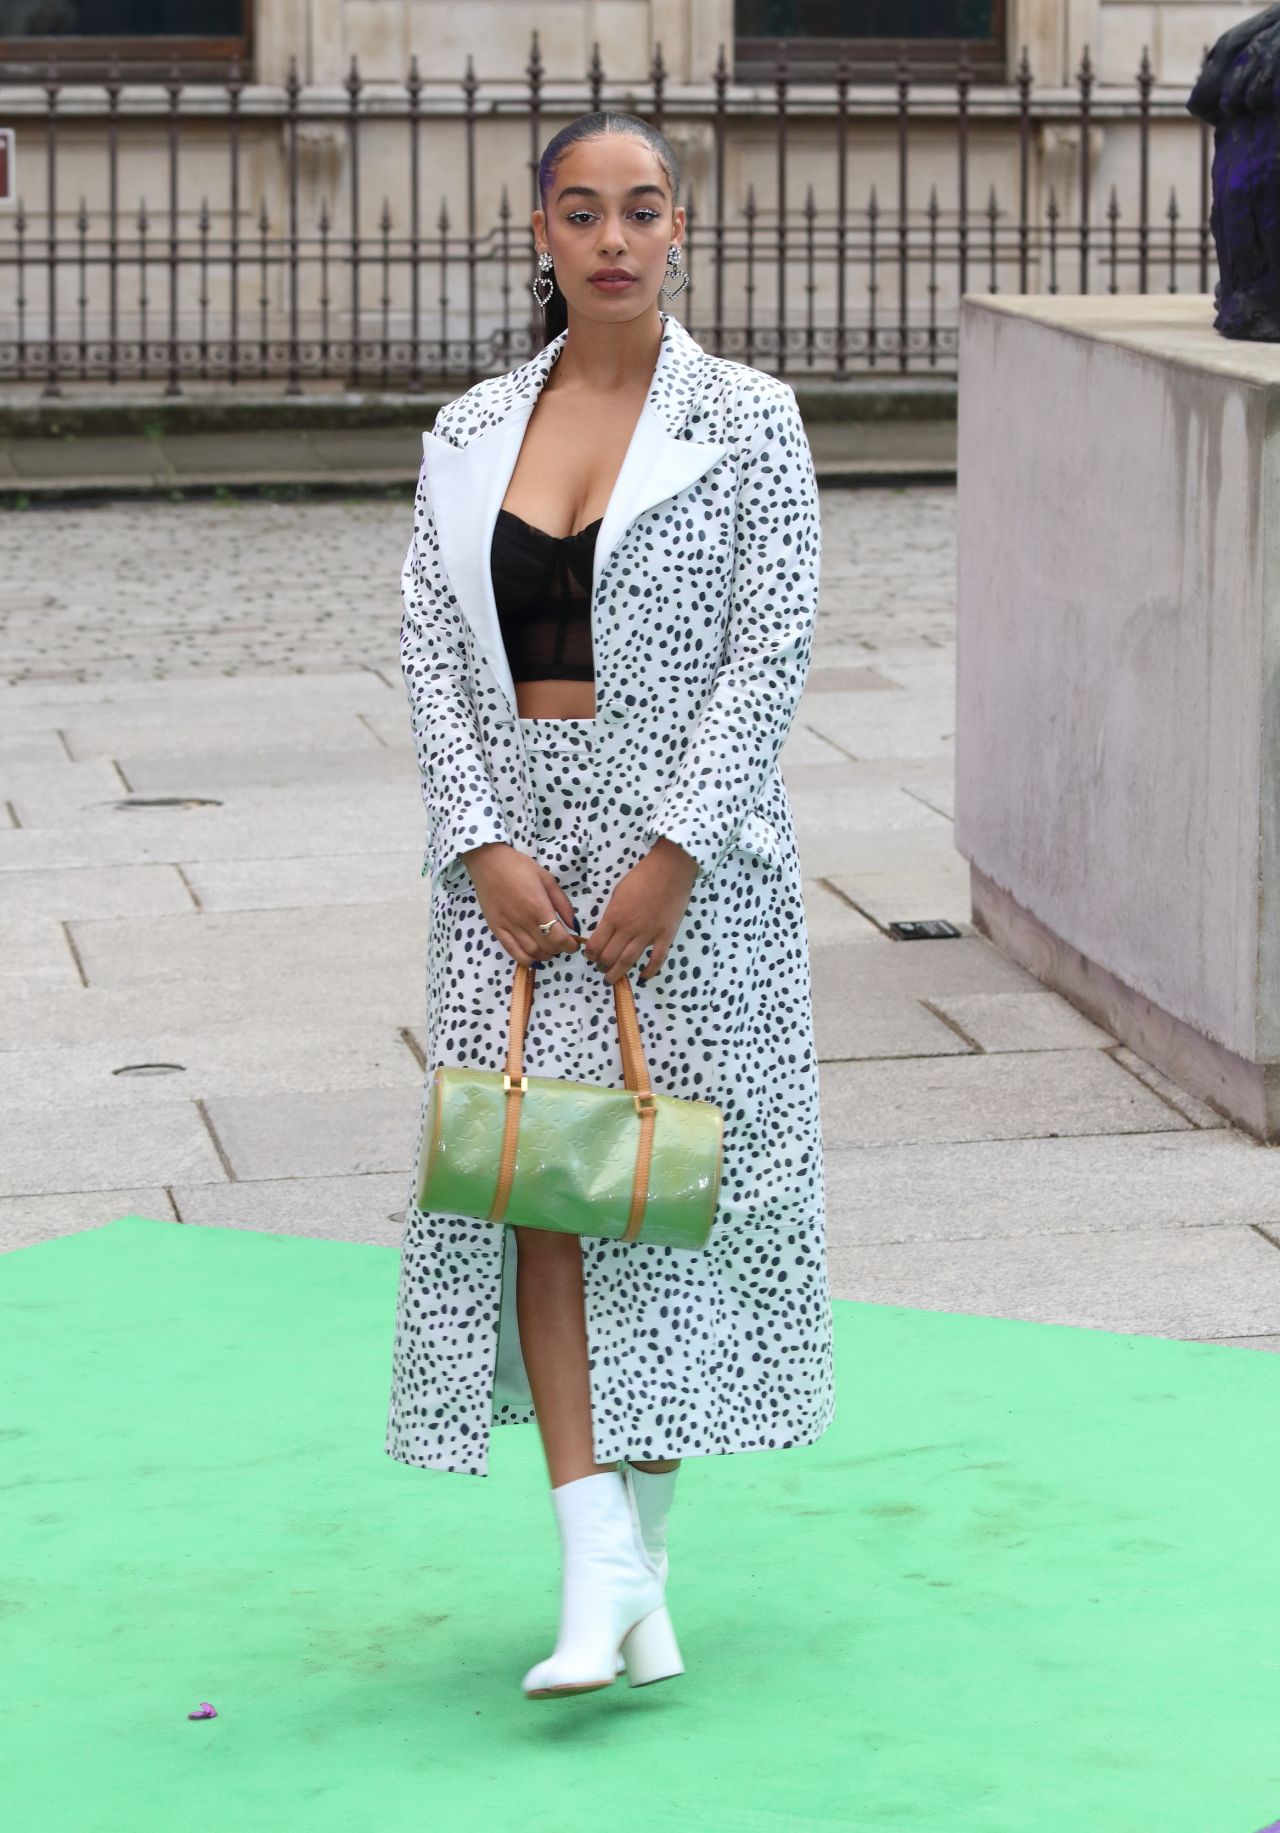 jorja-smith-royal-academy-of-arts-summer-exhibition-party-2019-in-london-3.jpg